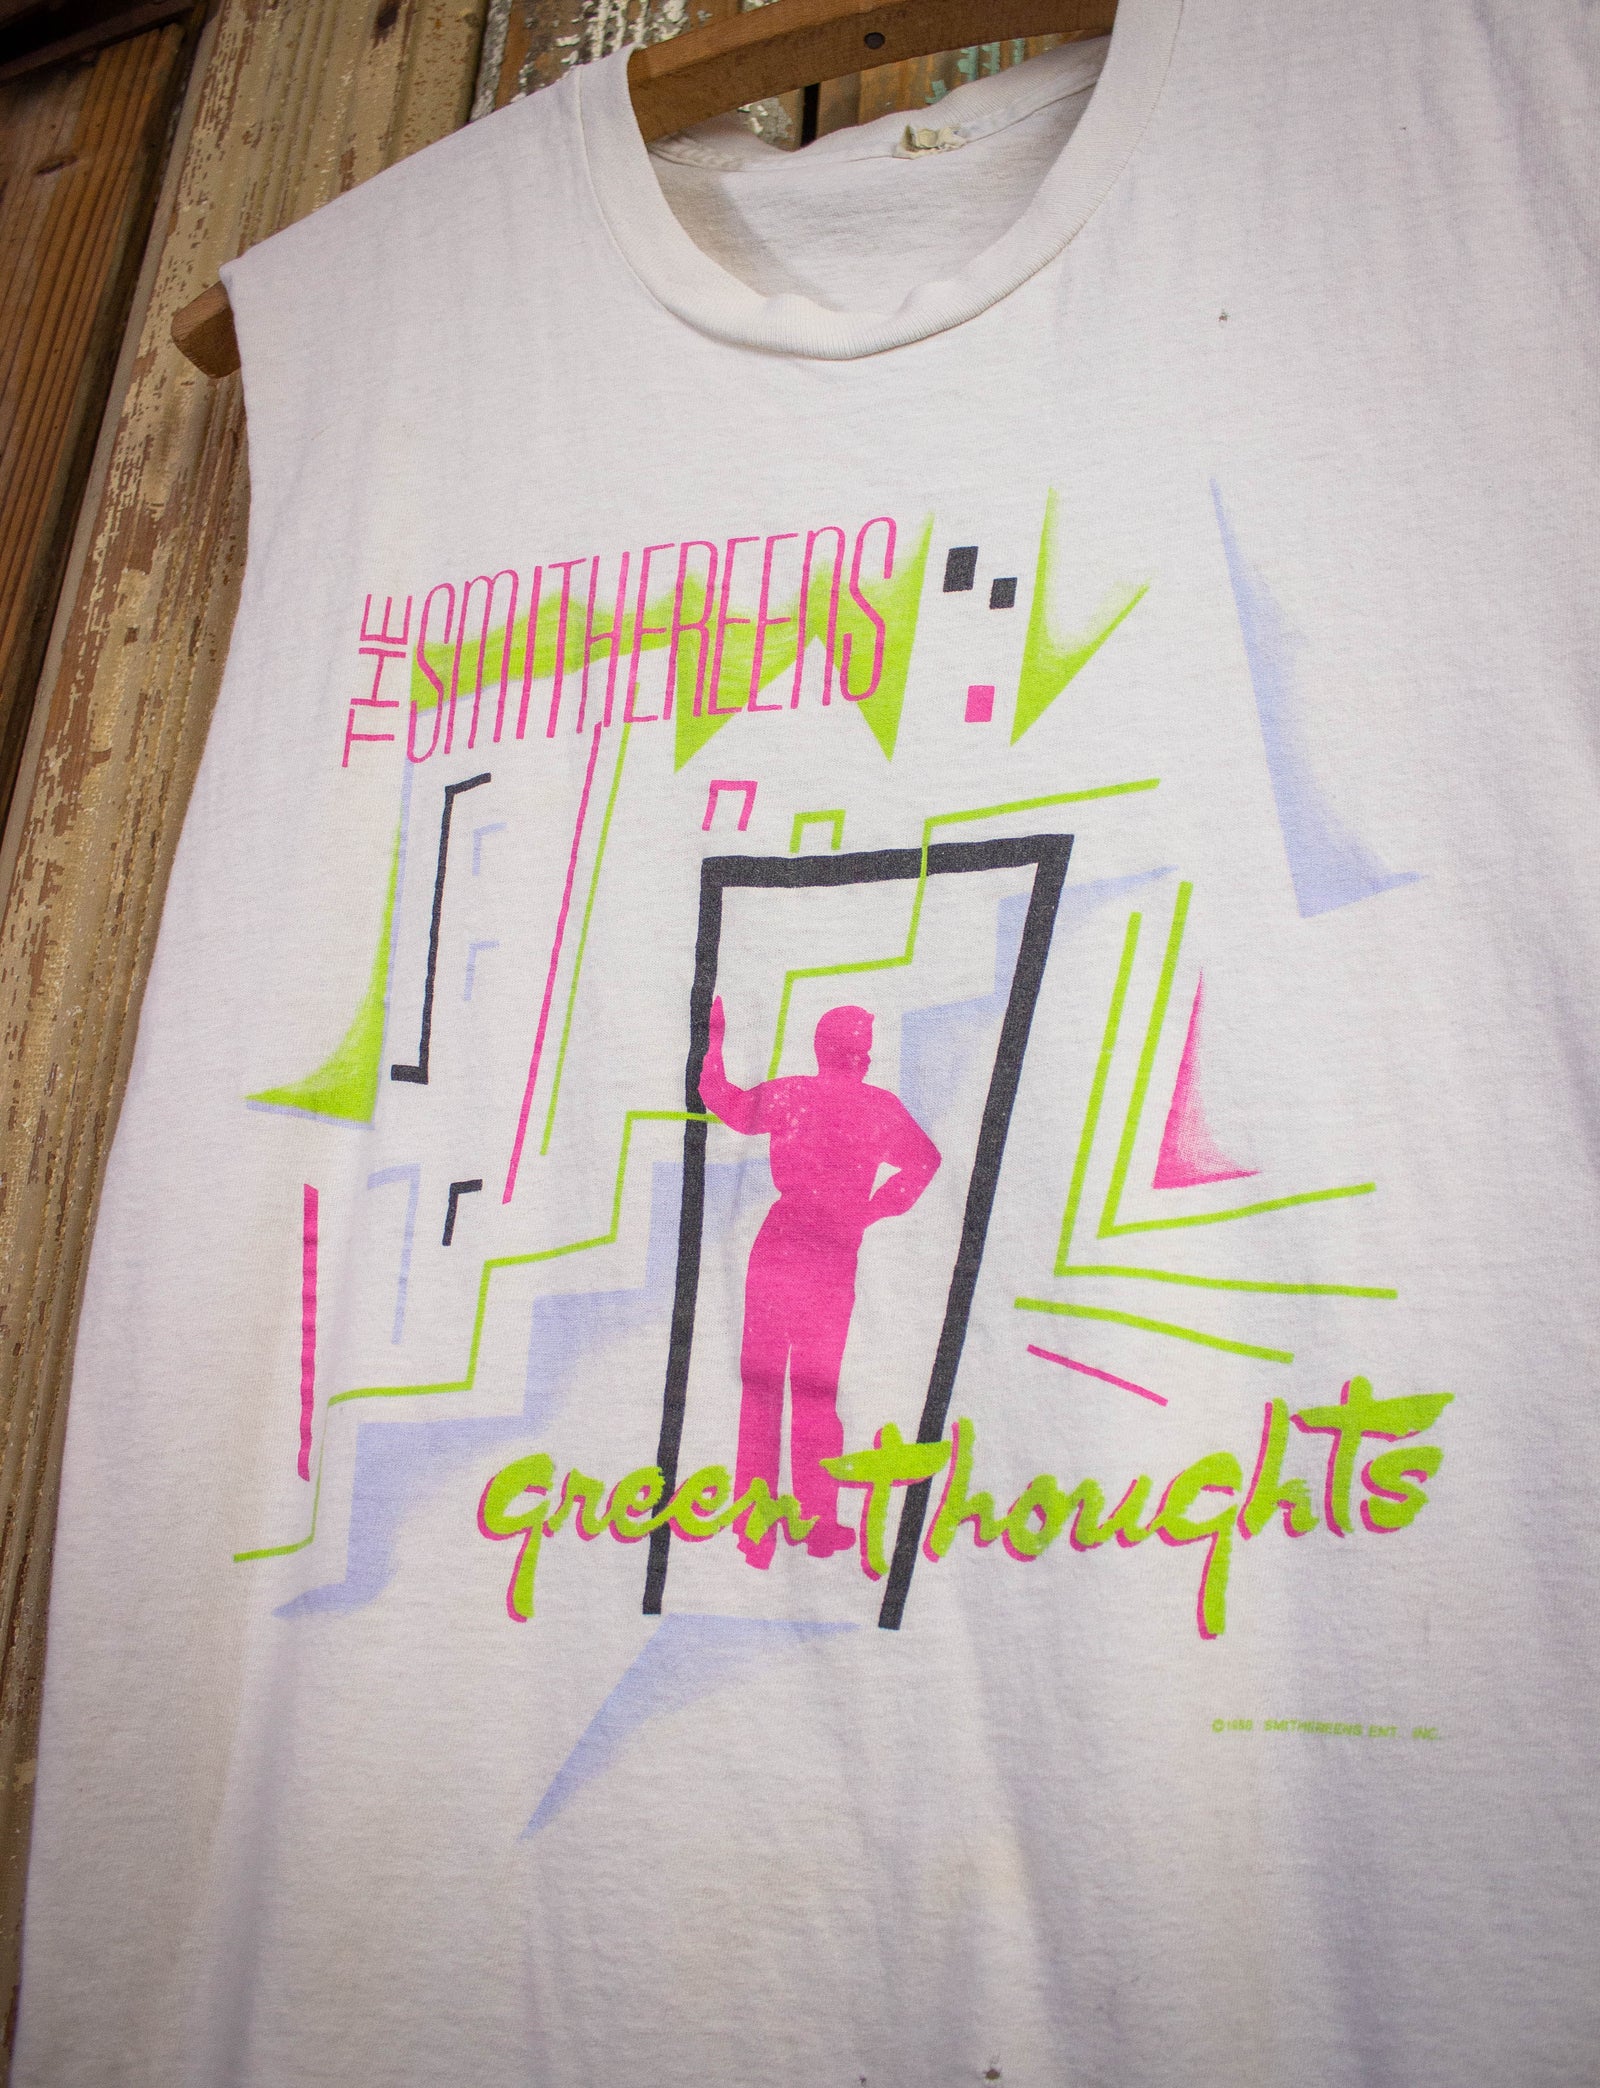 Vintage The Smithereens Green Thoughts Cut Off Concert T Shirt 1988 White Medium